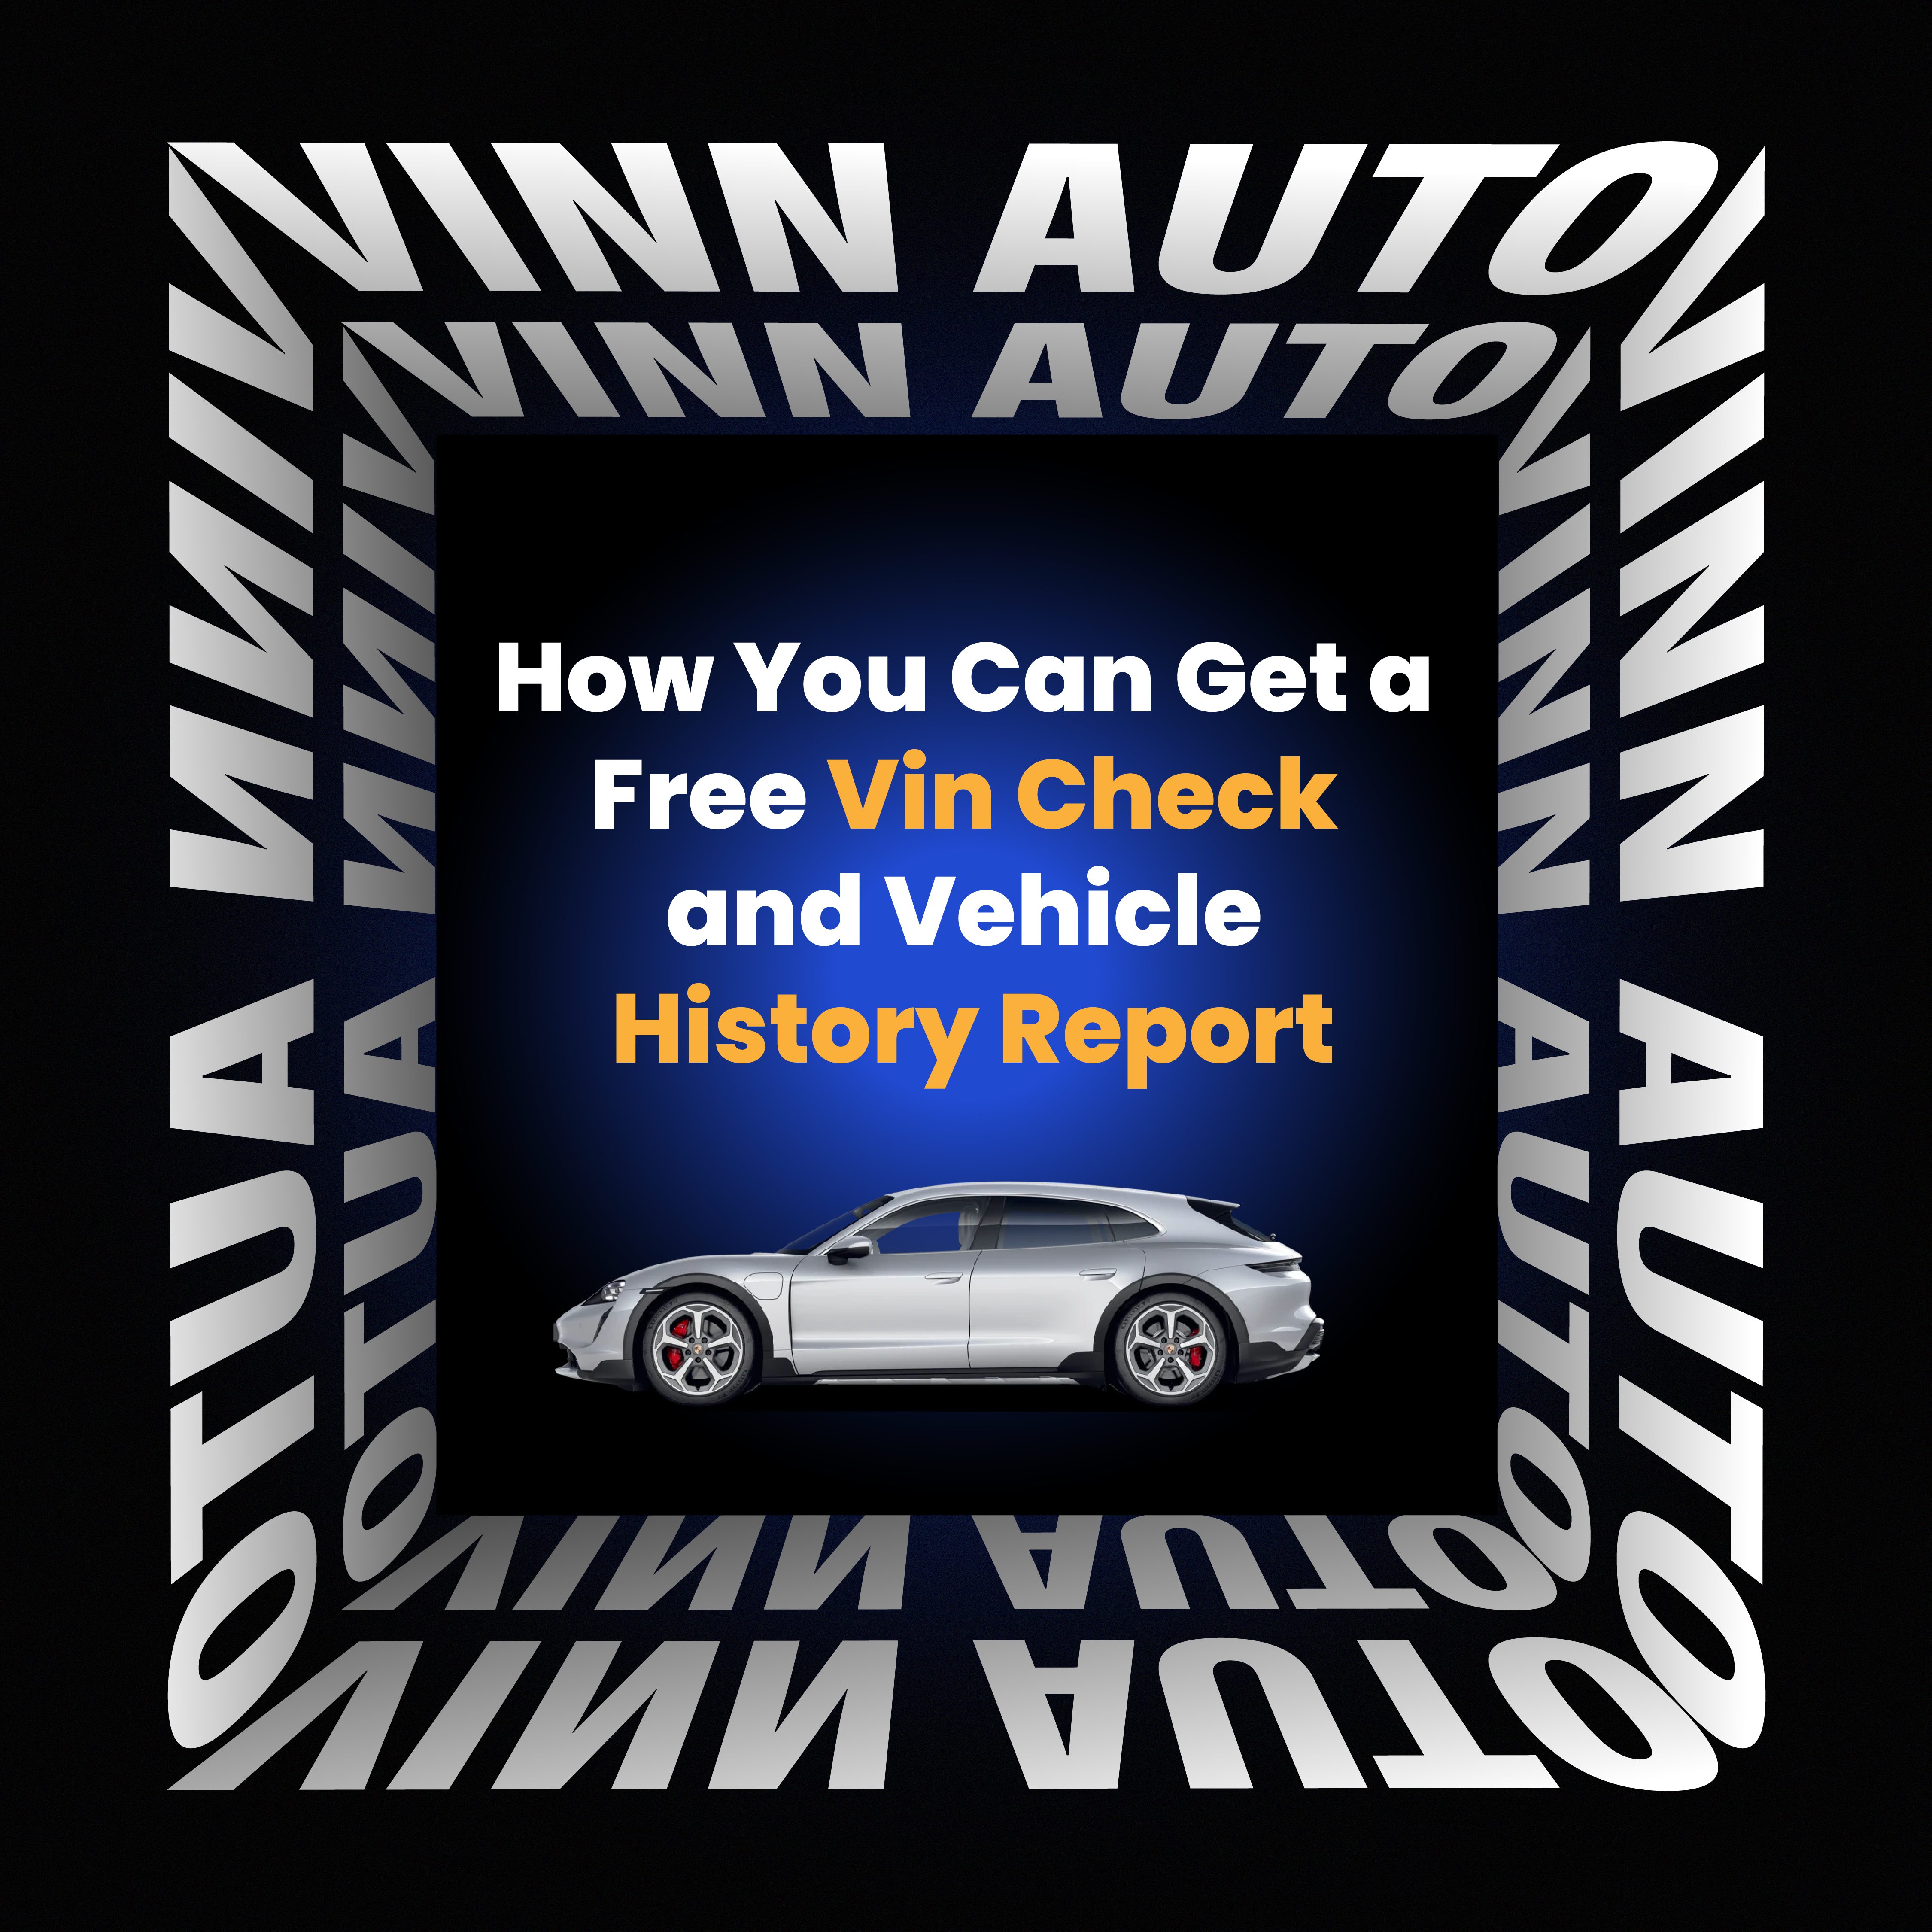 How You Can Get a Free Vin Check and Vehicle History Report VINN Auto